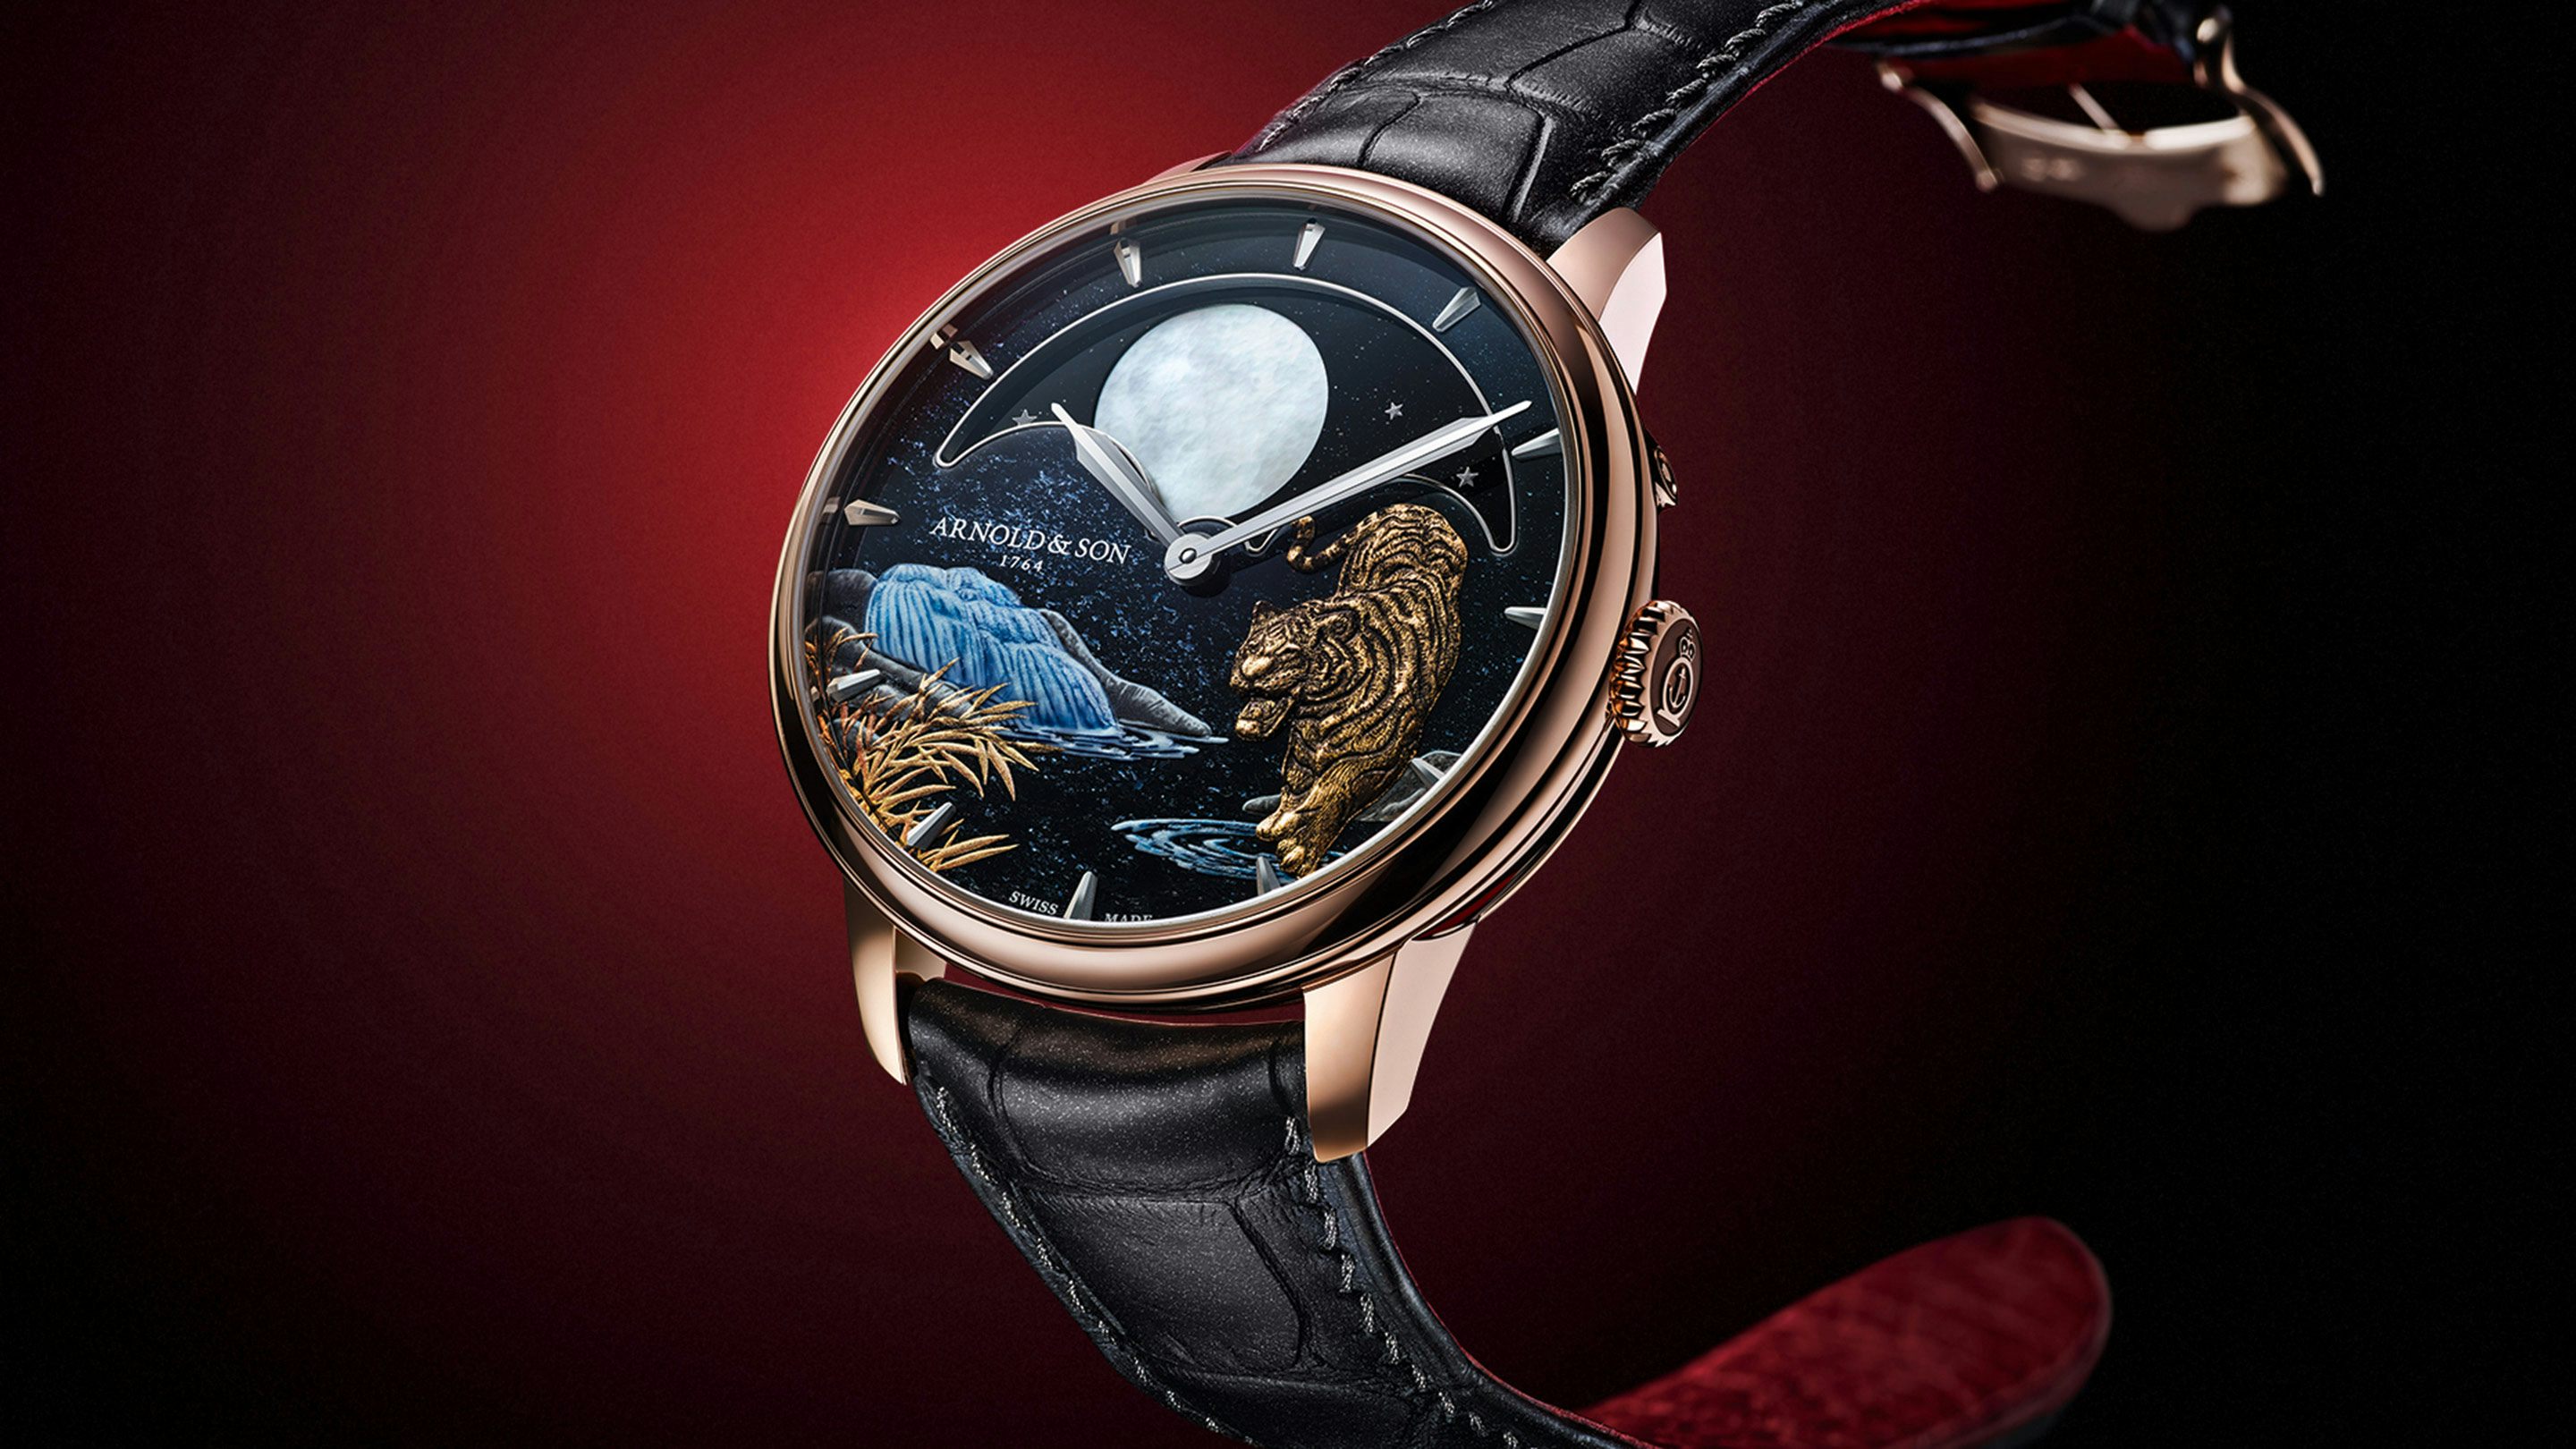 HODINKEE review of the Arnold & Son Perpetual Moon Year Of The Tiger